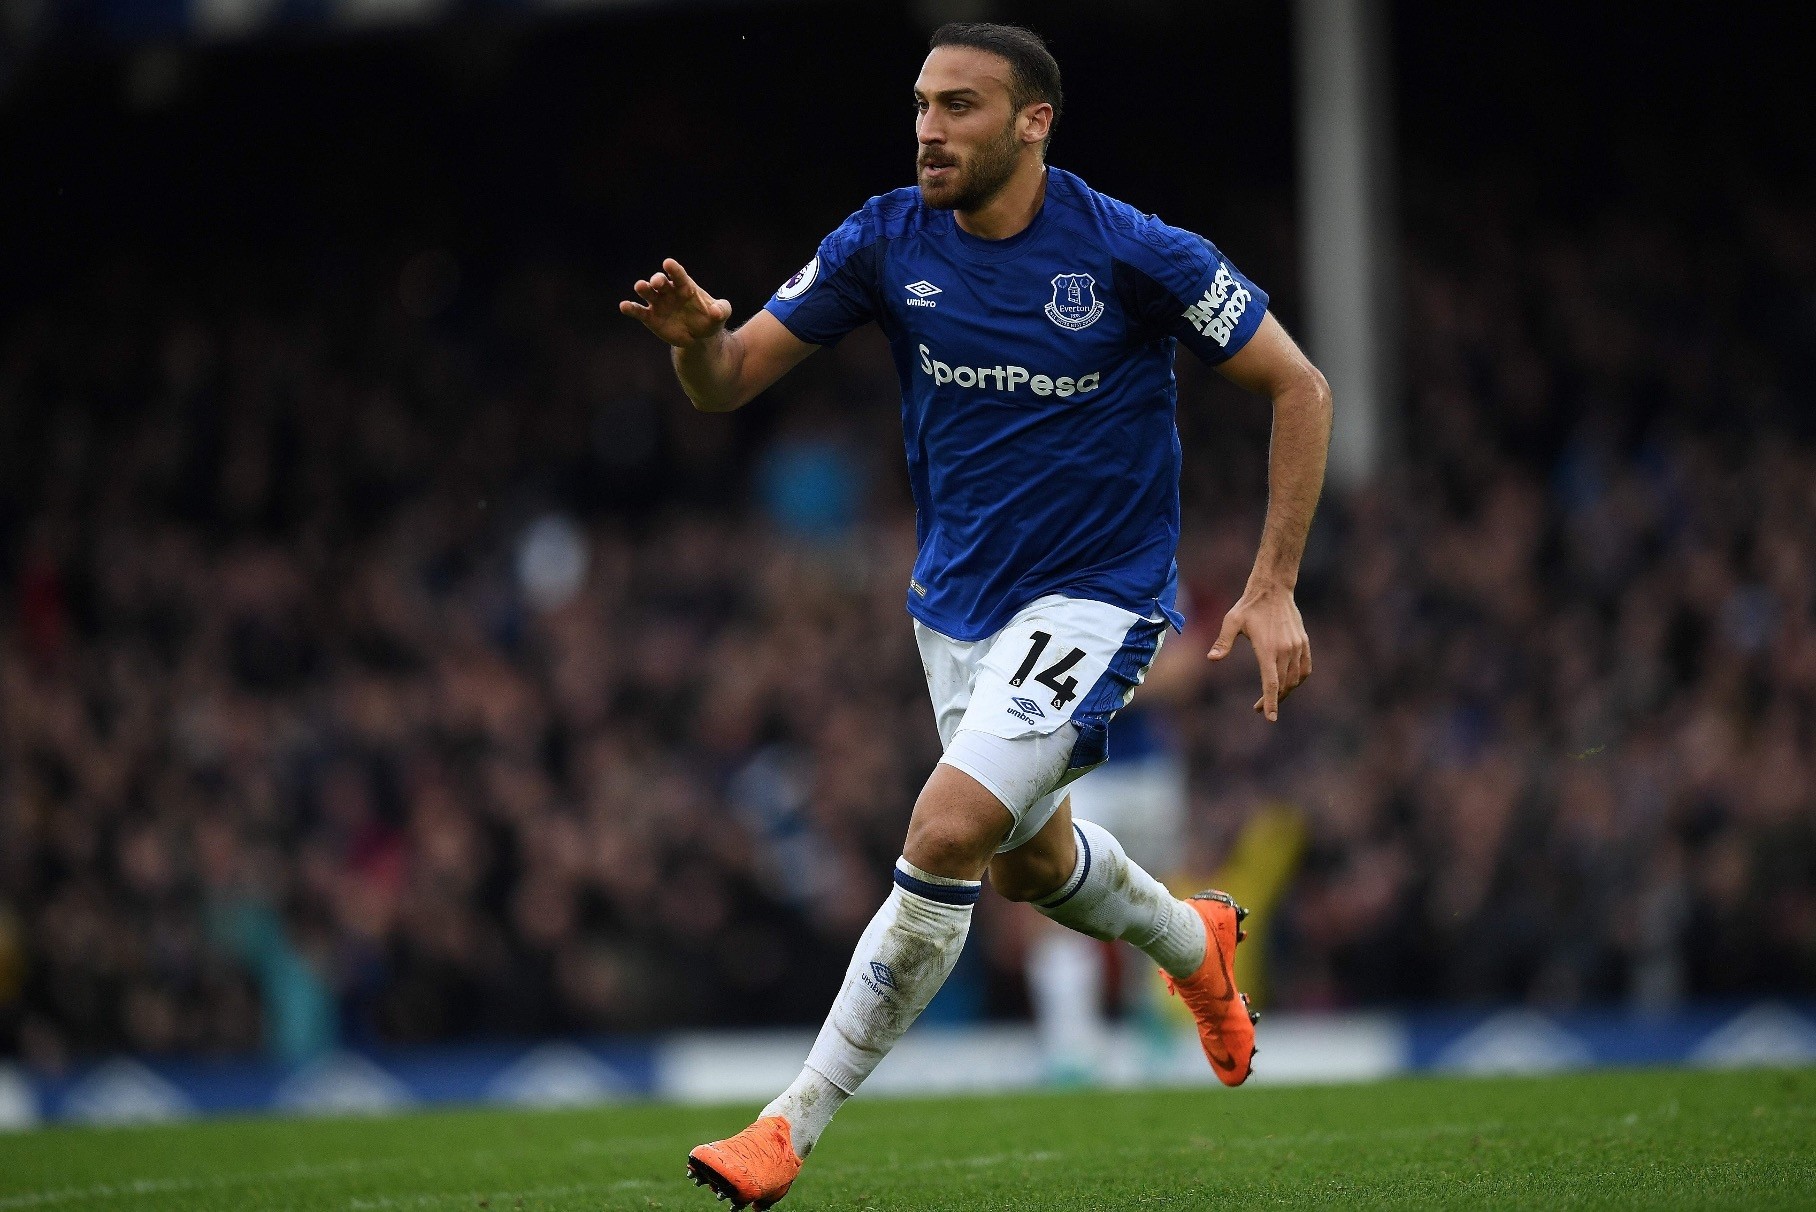 Evertonu2019s Turkish striker Cenk Tosun celebrates scoring his teamu2019s second goal during the English Premier League football match between Everton and Brighton and Hove Albion at Goodison Park in Liverpool.